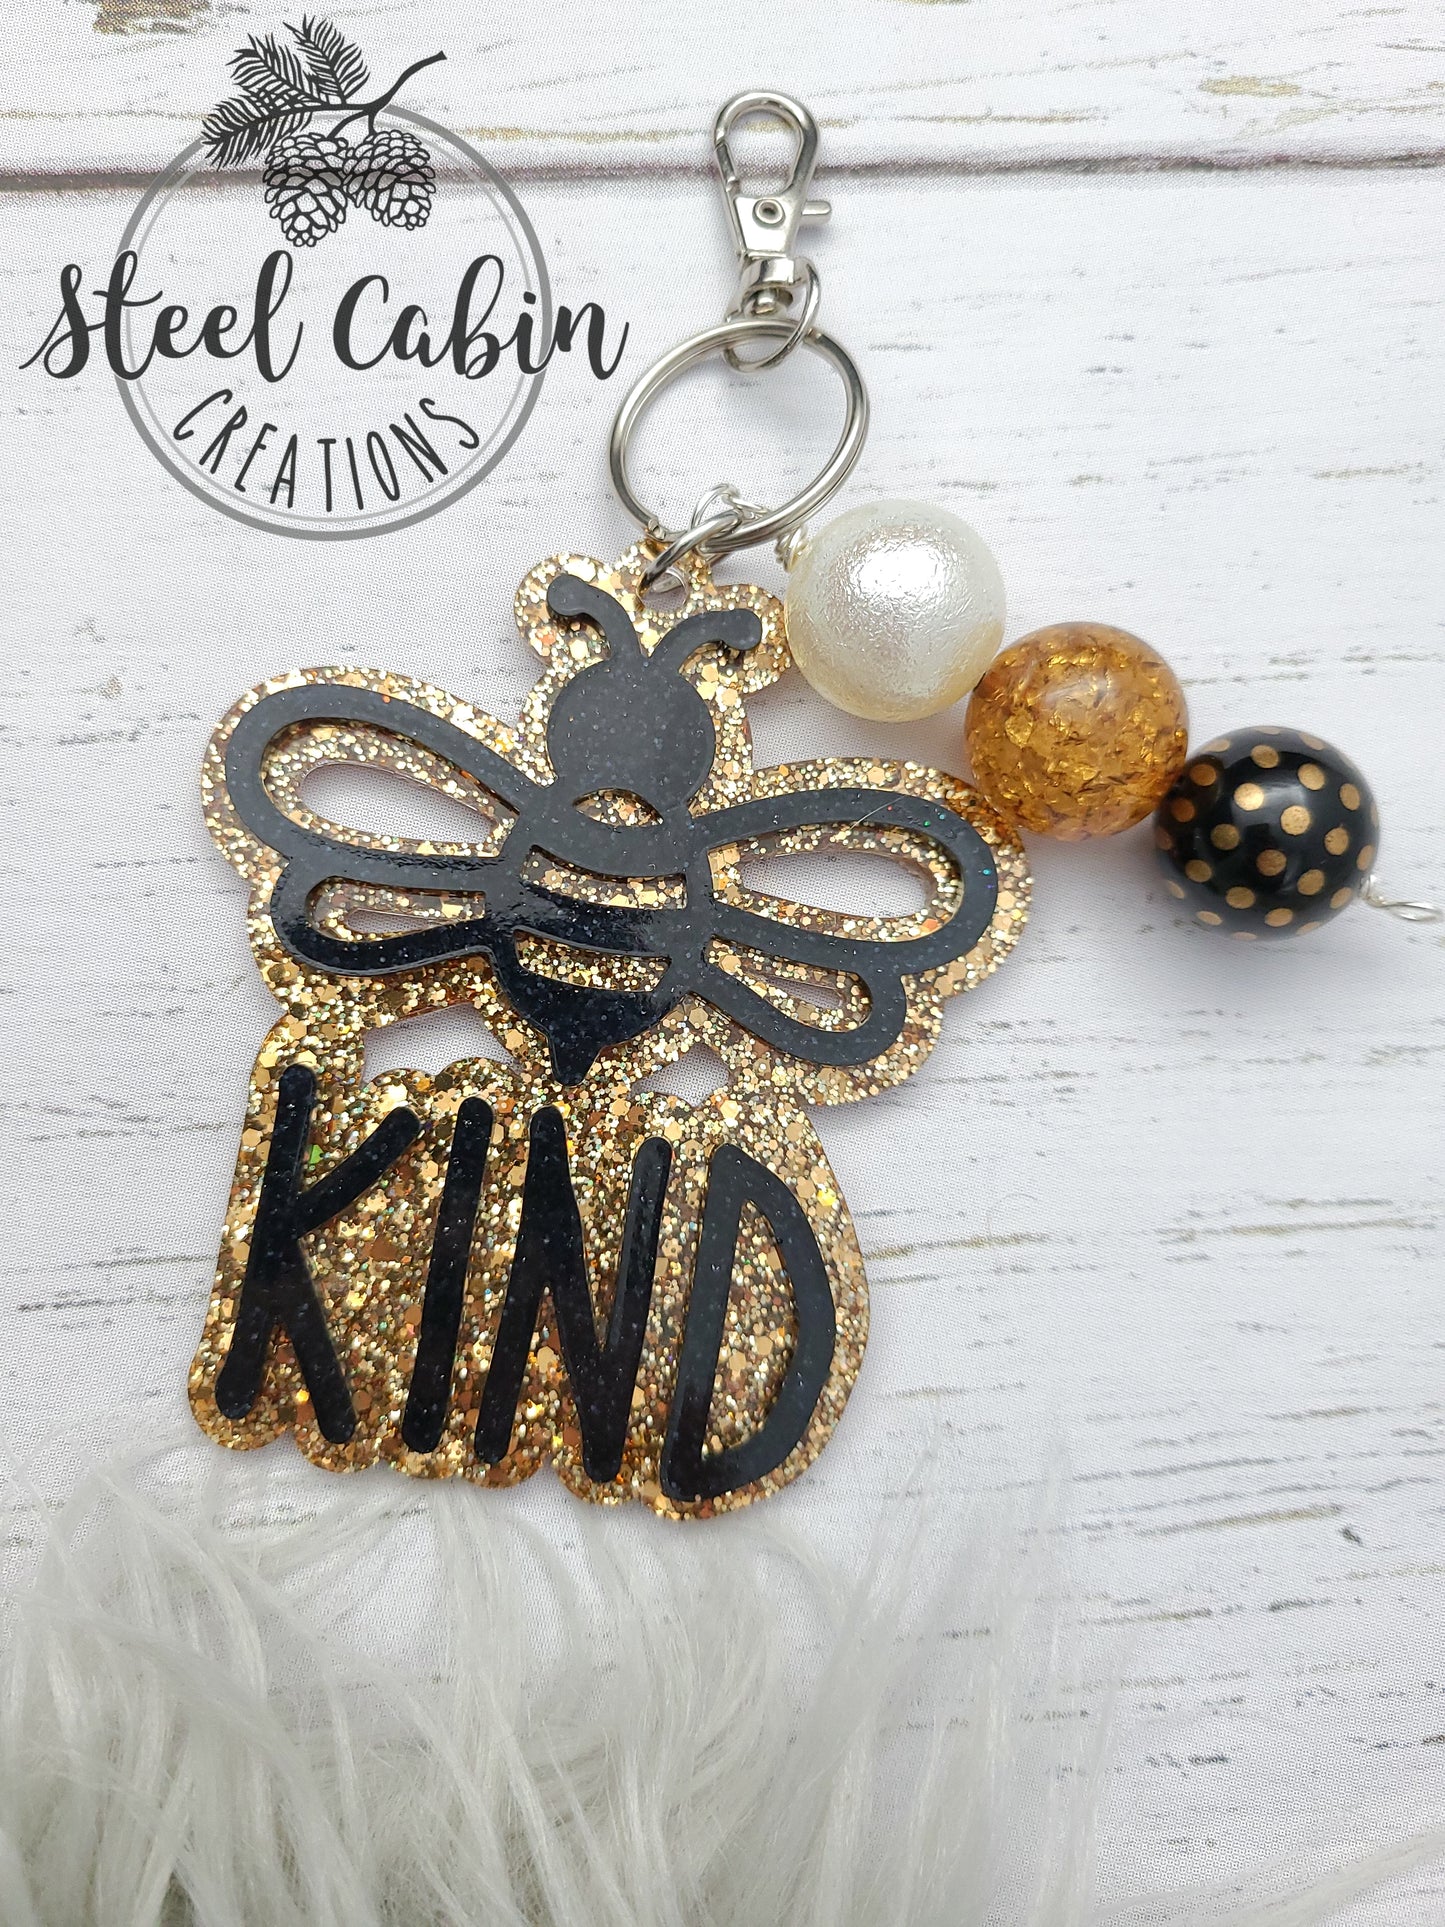 Bee Kind - Keychain - Multiple Colors Available